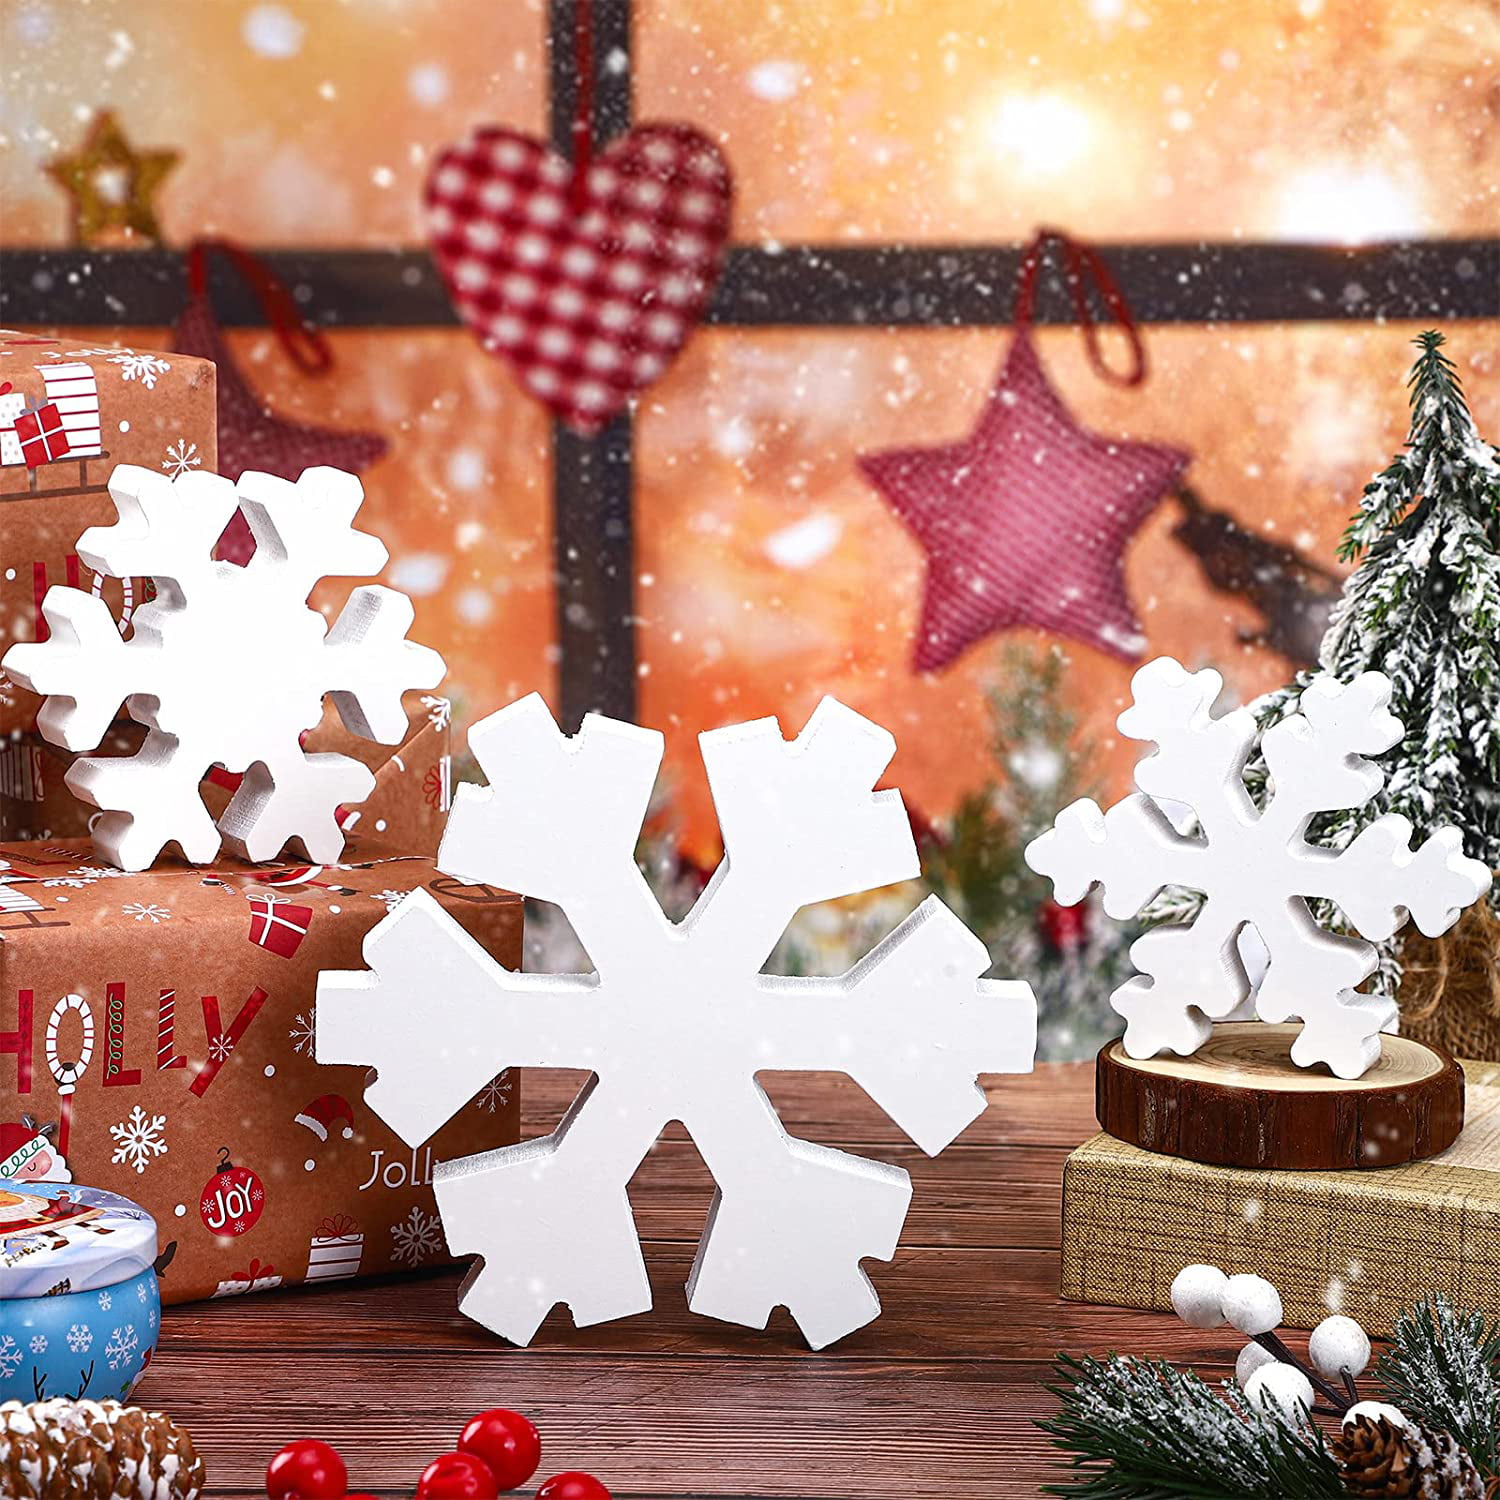 Wooden Snowflakes Decor Wood Snowflakes For Crafts 15 Piece Winter Wood  Snowflake Block Snowflake Tiered Tray Decor Wooden